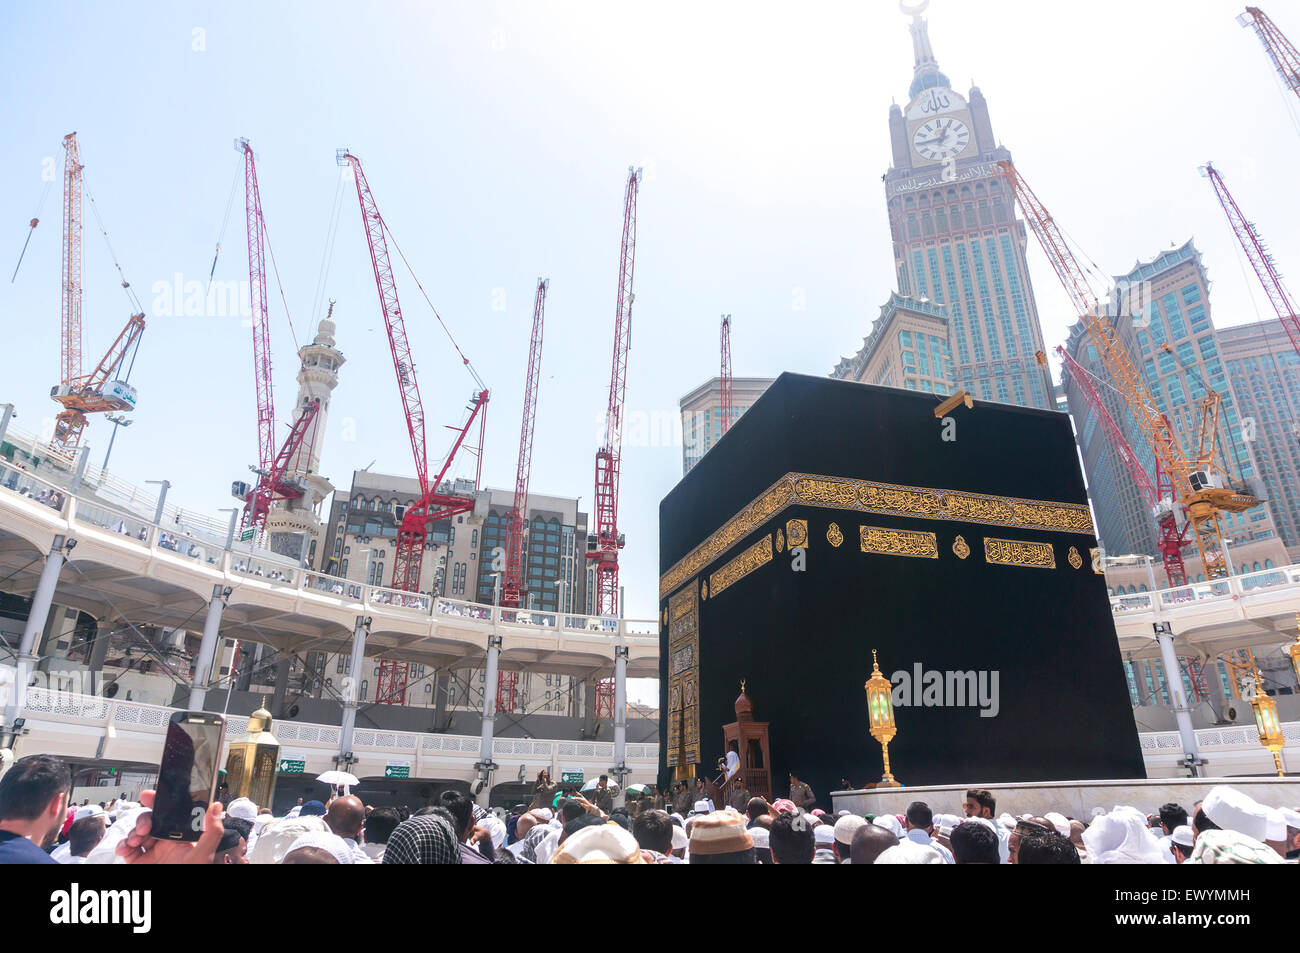 Mecca Clock Tower High Resolution Stock Photography and Images - Alamy